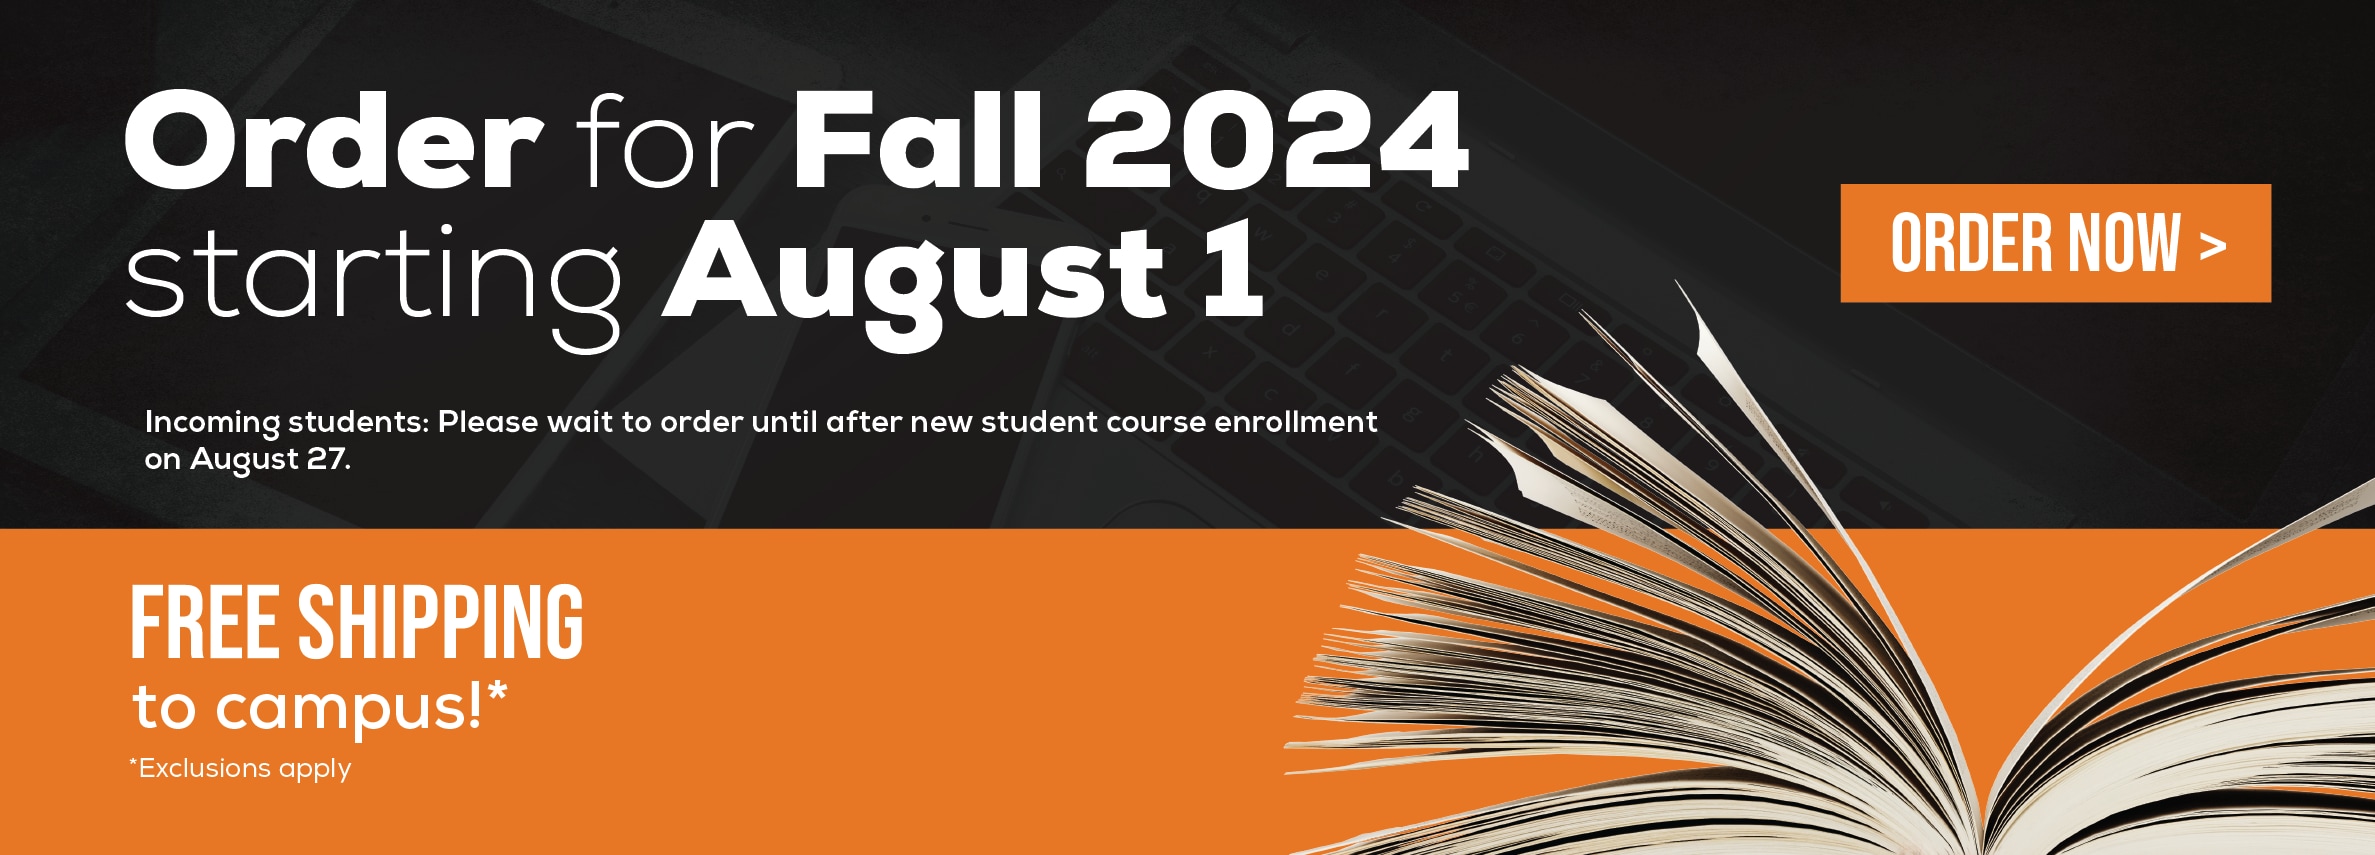 Order Your Course Materials for Fall 2024. Incoming students: Please wait to order until after new student course enrollment on August 27. Order now. Free shipping to campus!* *Exclusions may apply